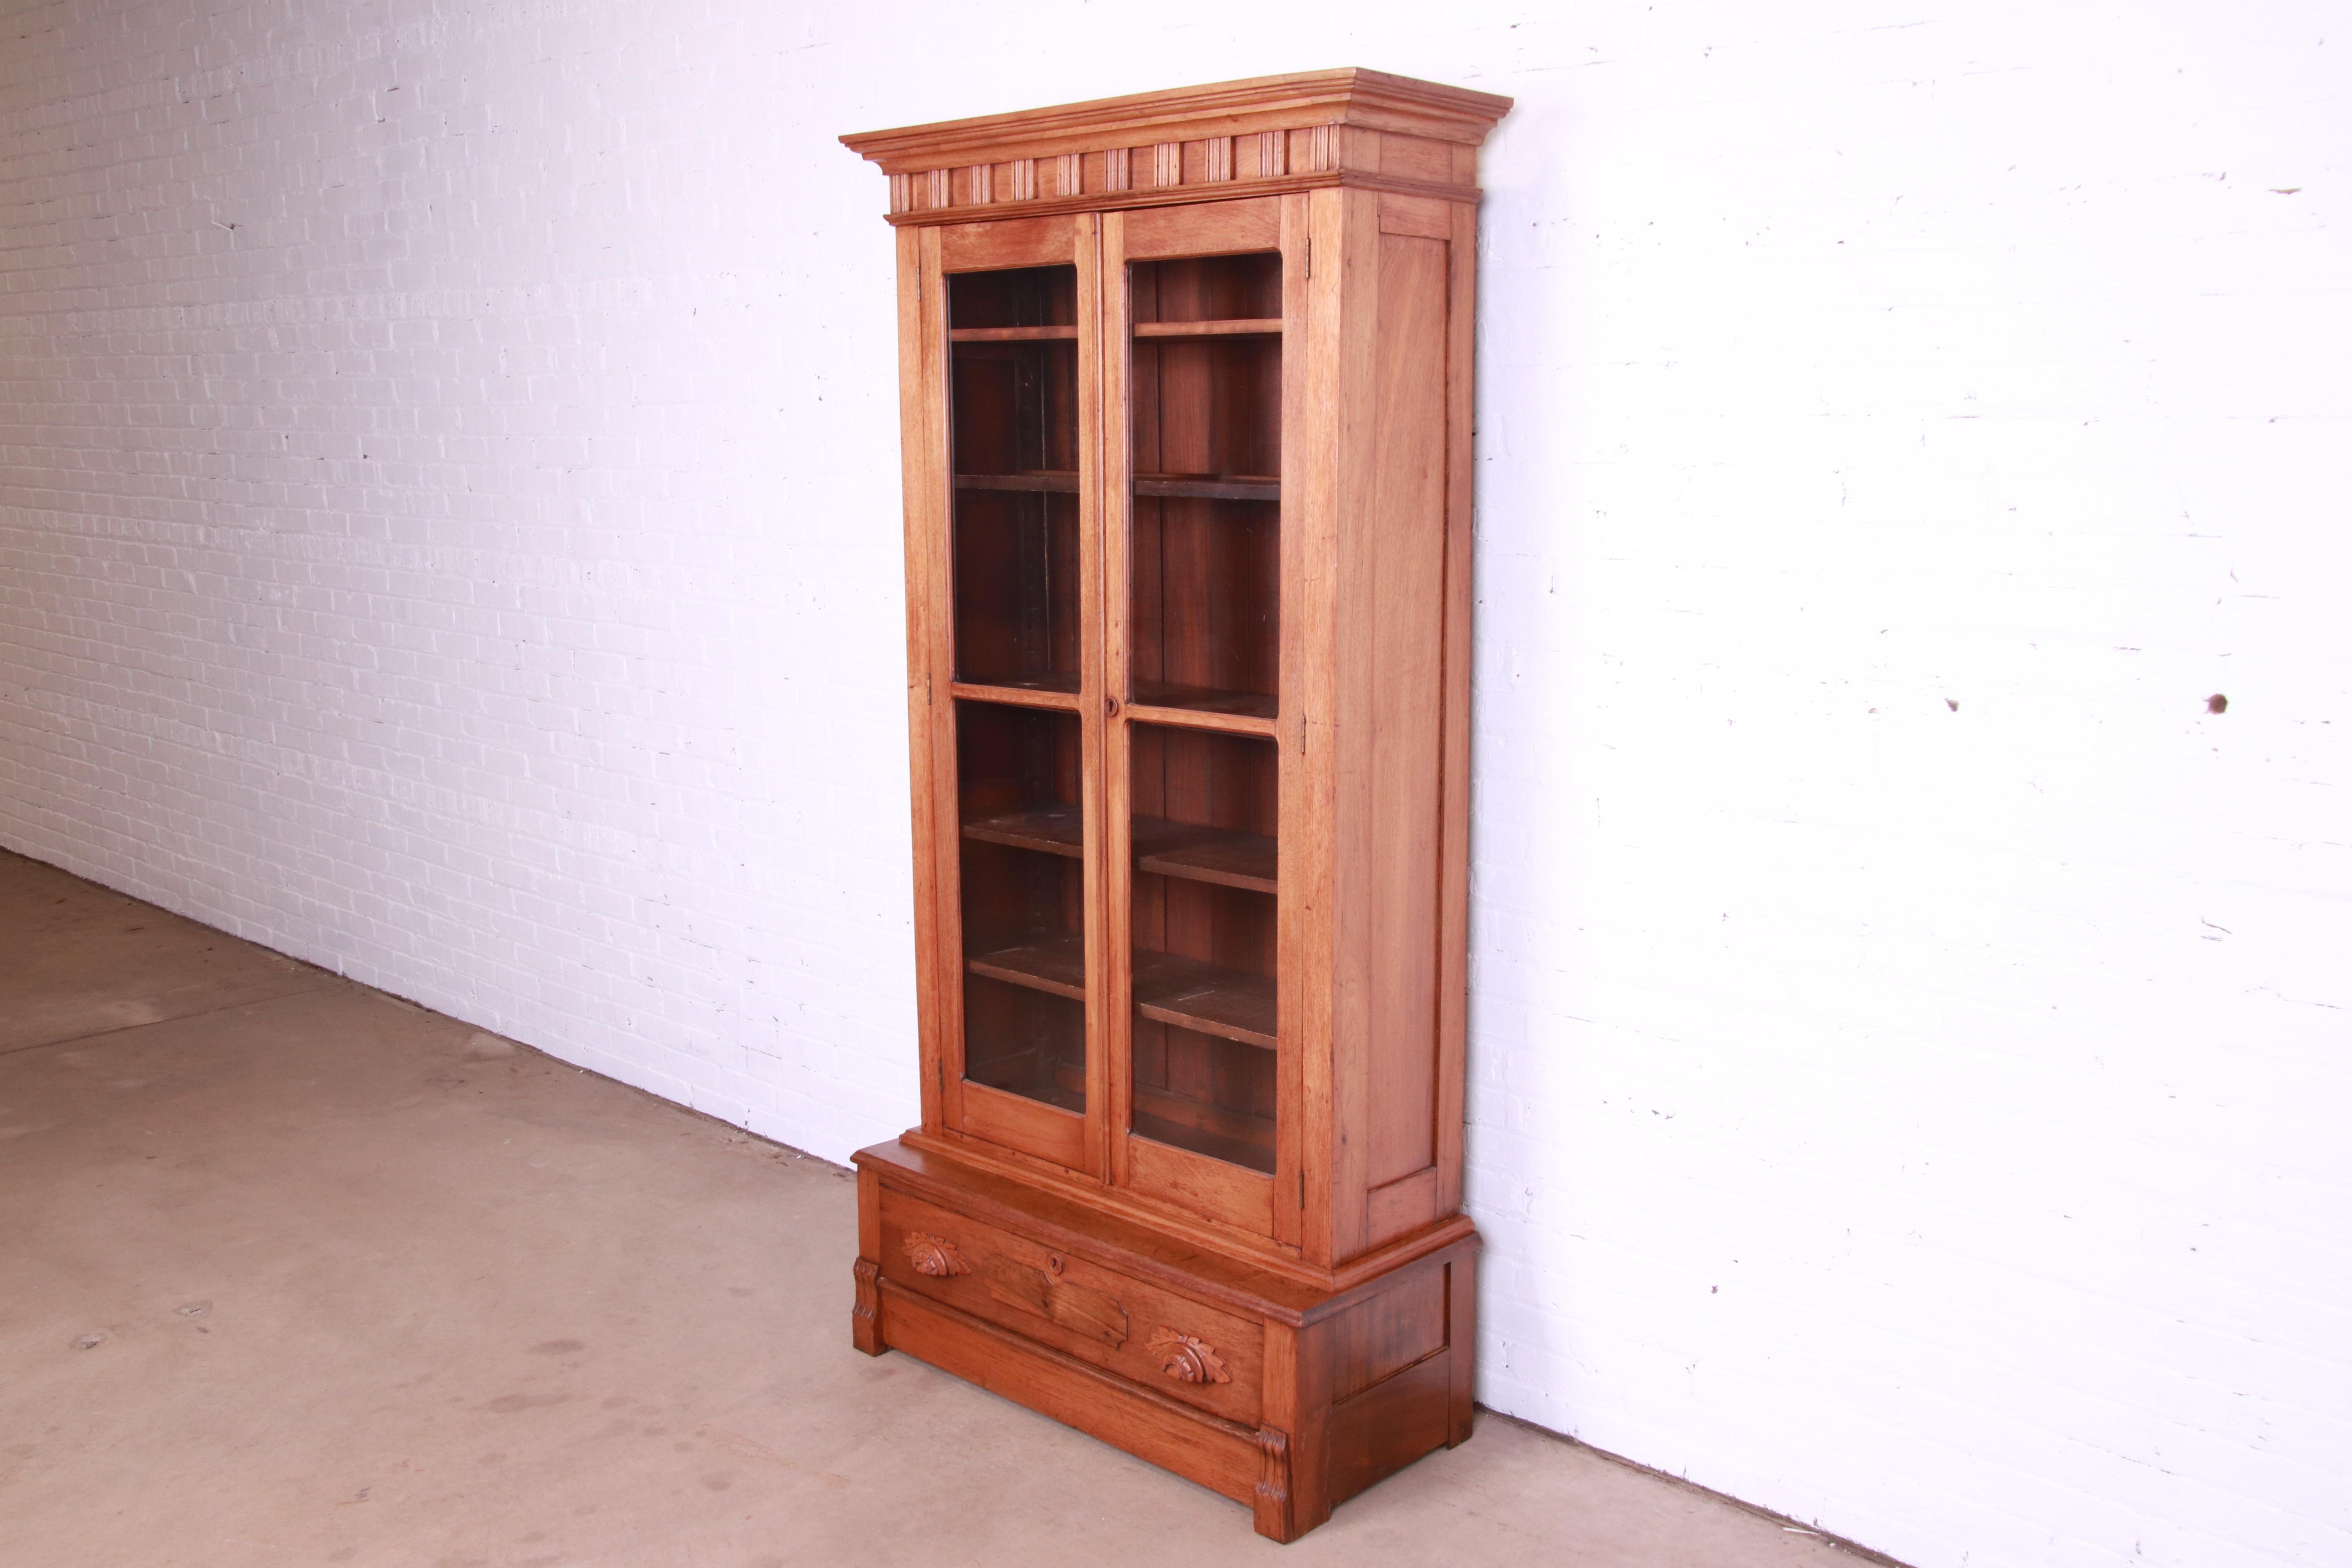 A beautiful antique Victorian Eastlake bookcase cabinet

USA, Circa 1880s

Carved solid walnut, with glass front doors.

Measures: 38.25